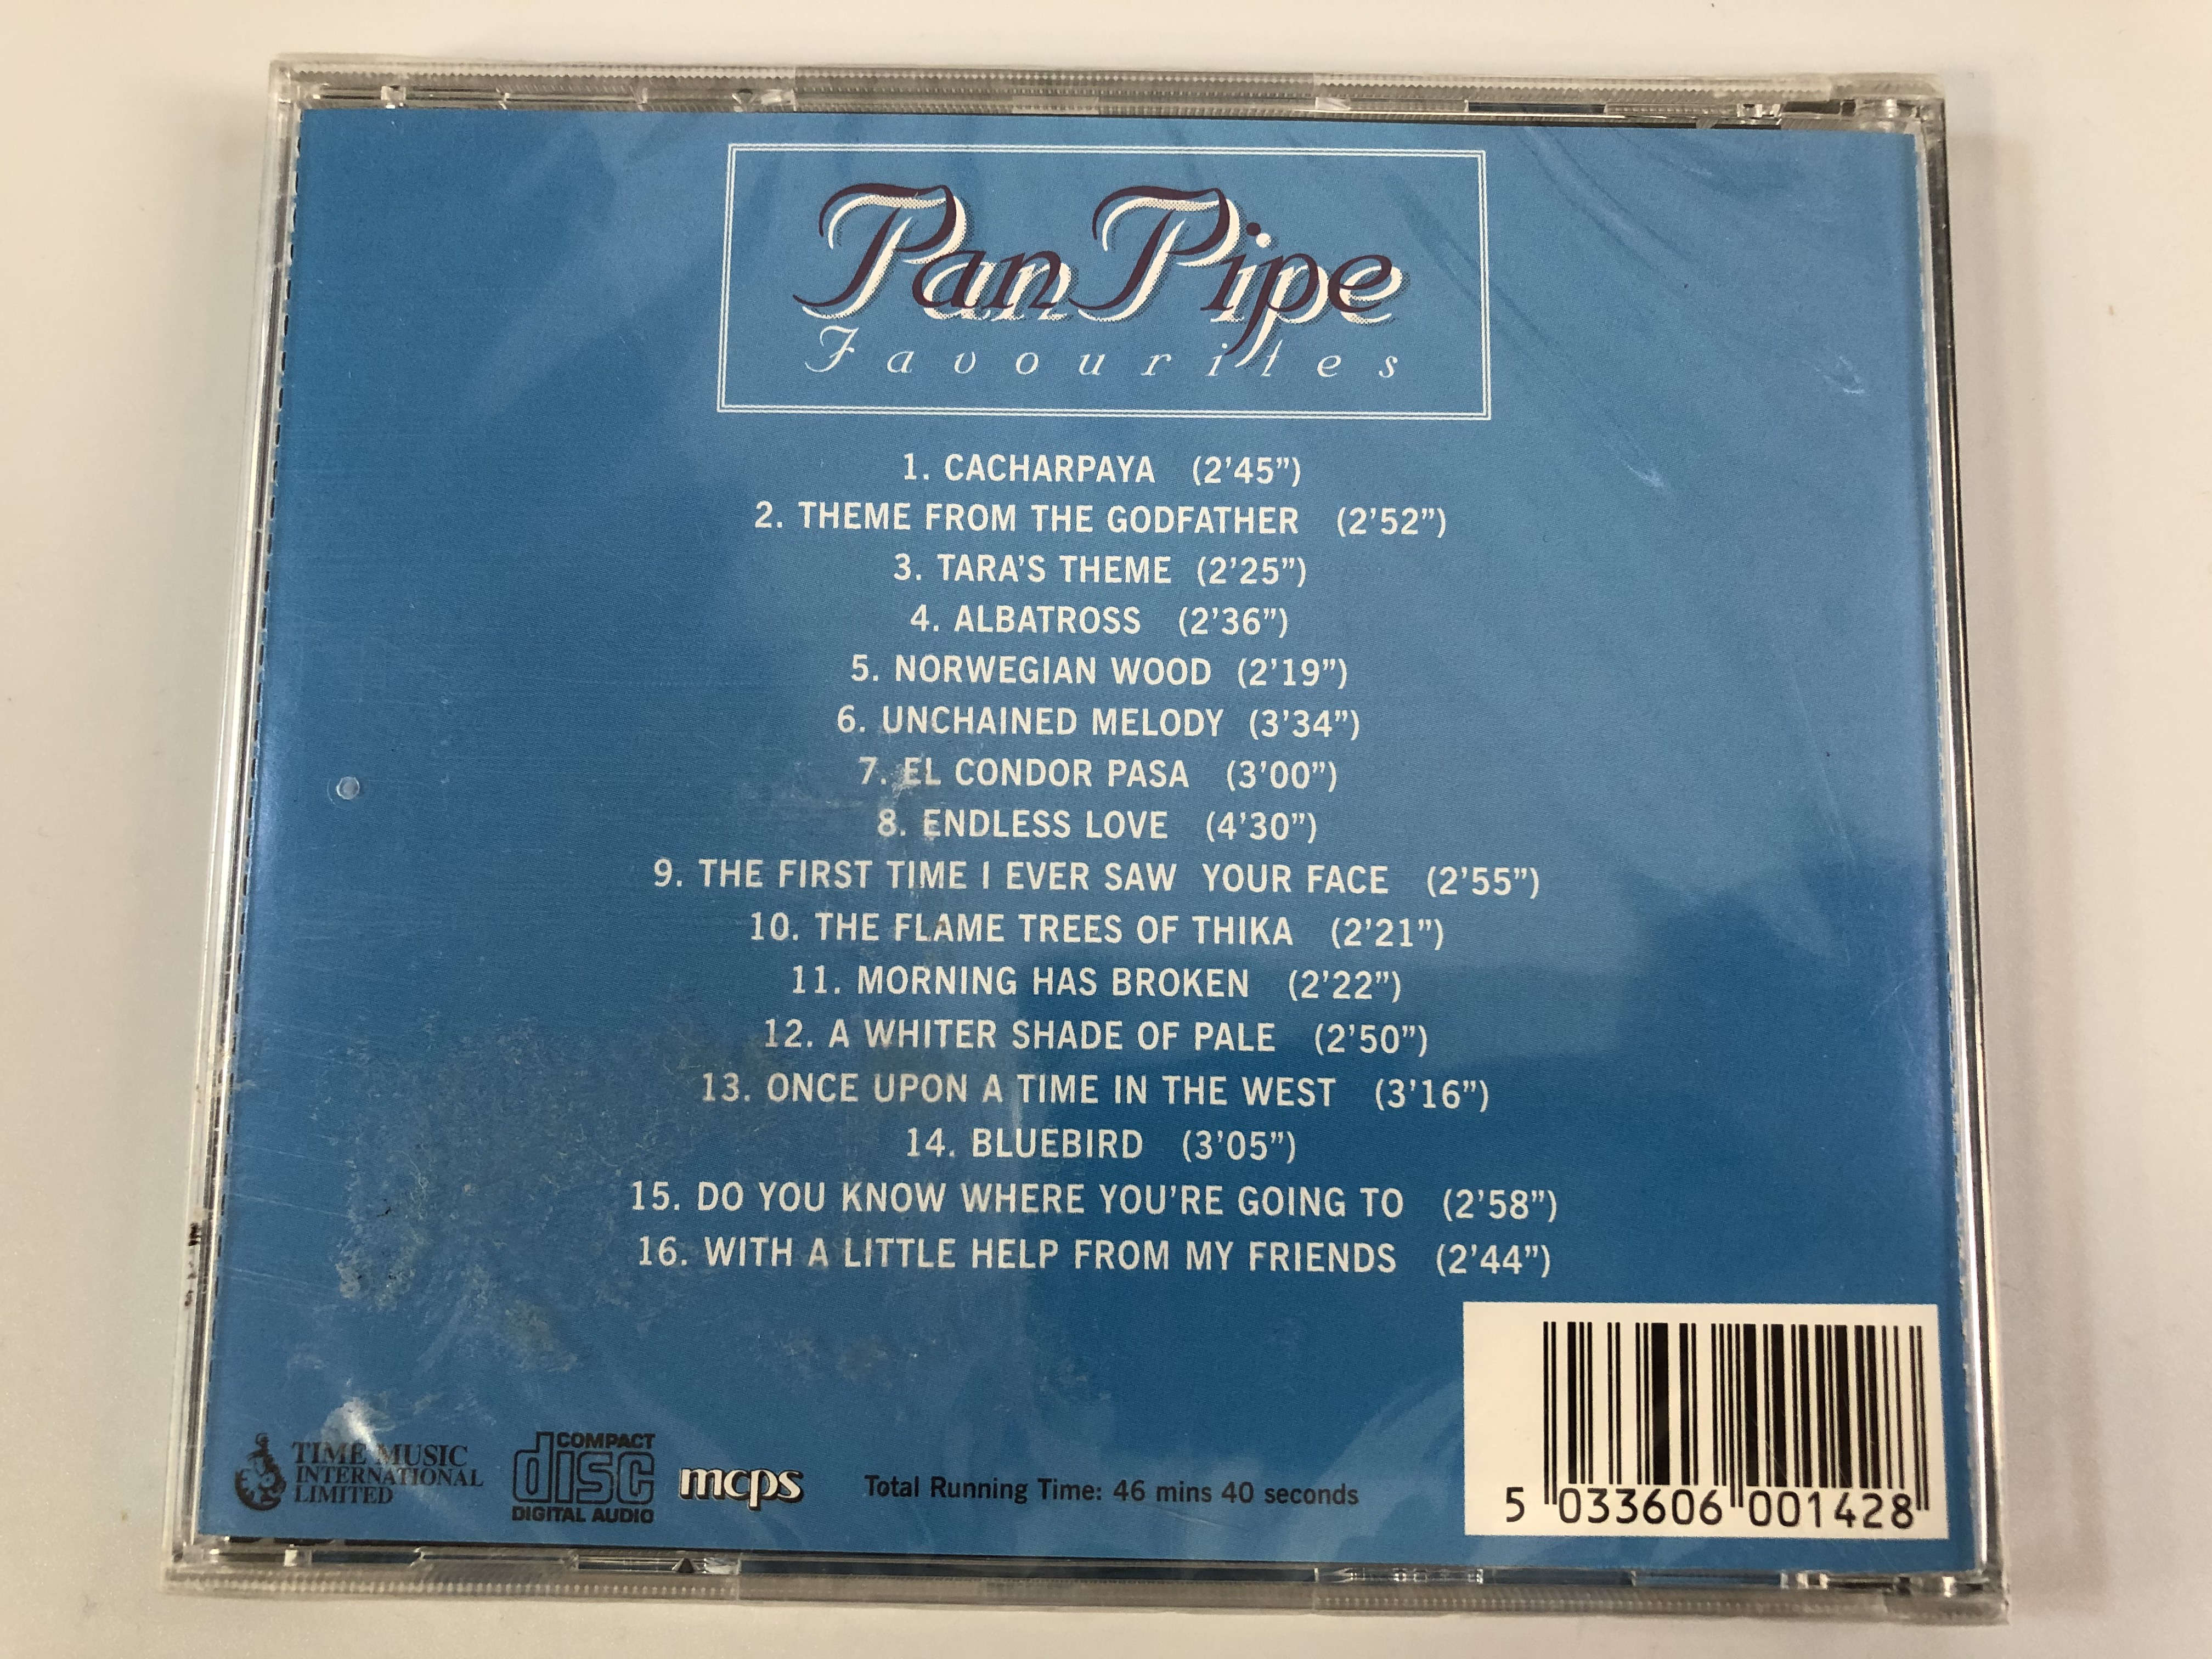 pan-pipe-favourites-featuring-albatross-el-condor-pasa-a-whiter-shade-of-pale-16-unforgettable-melodies-time-music-international-limited-audio-cd-tmi014-2-.jpg